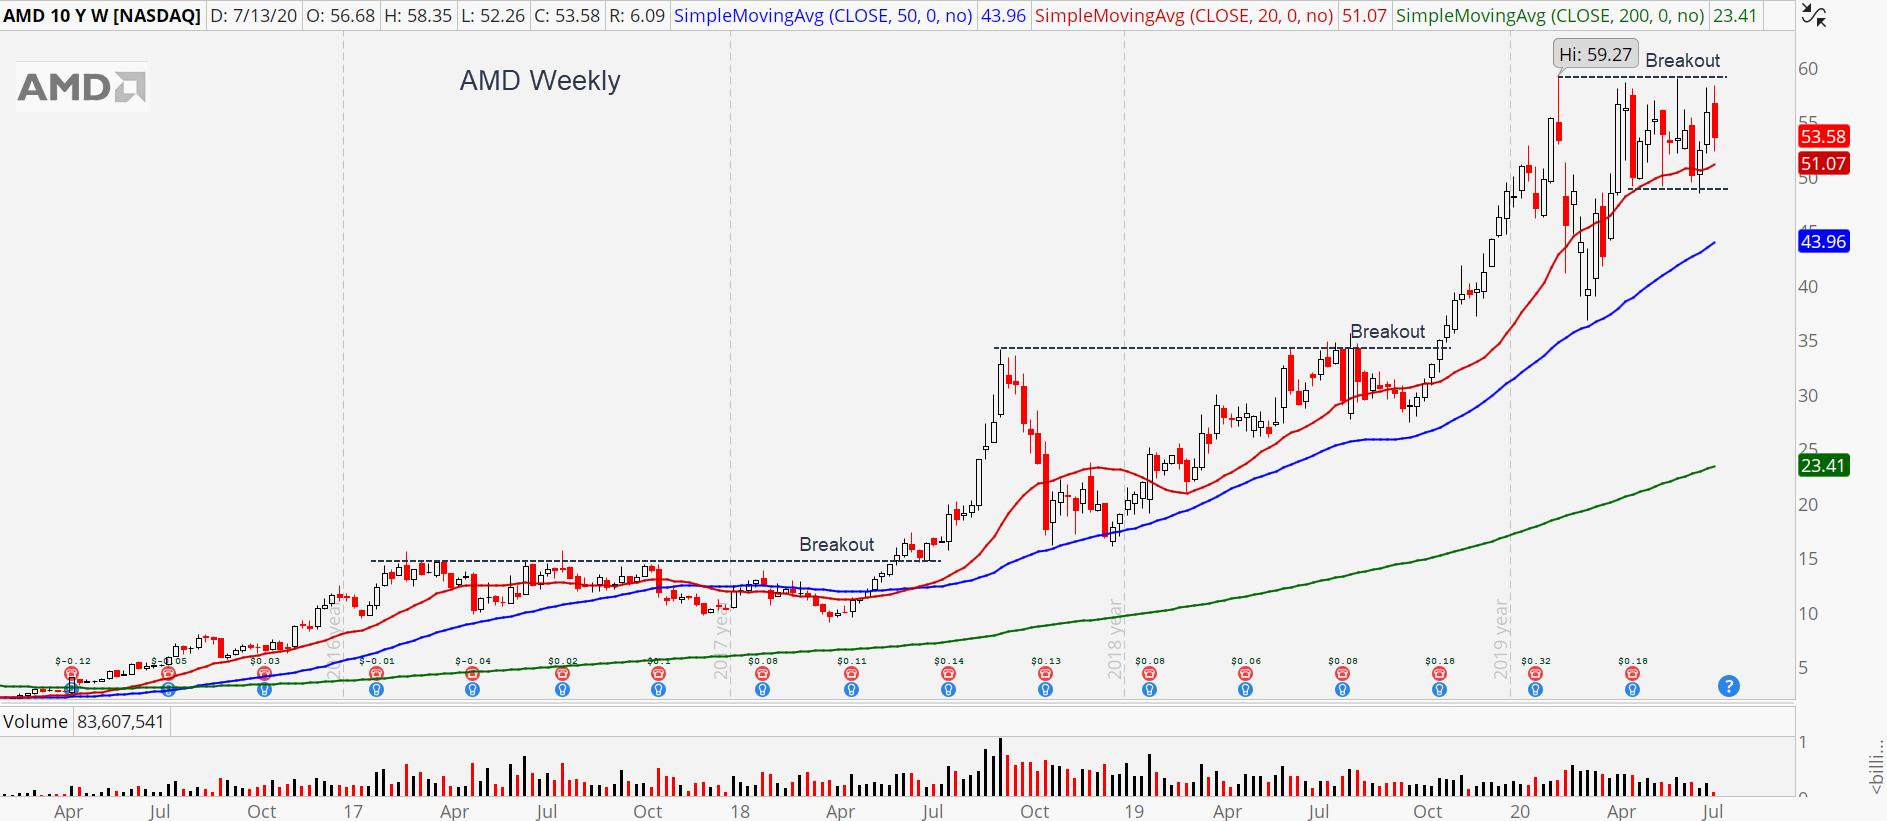 Advanced Micro Devices (AMD) weekly stock chart showing breakouts